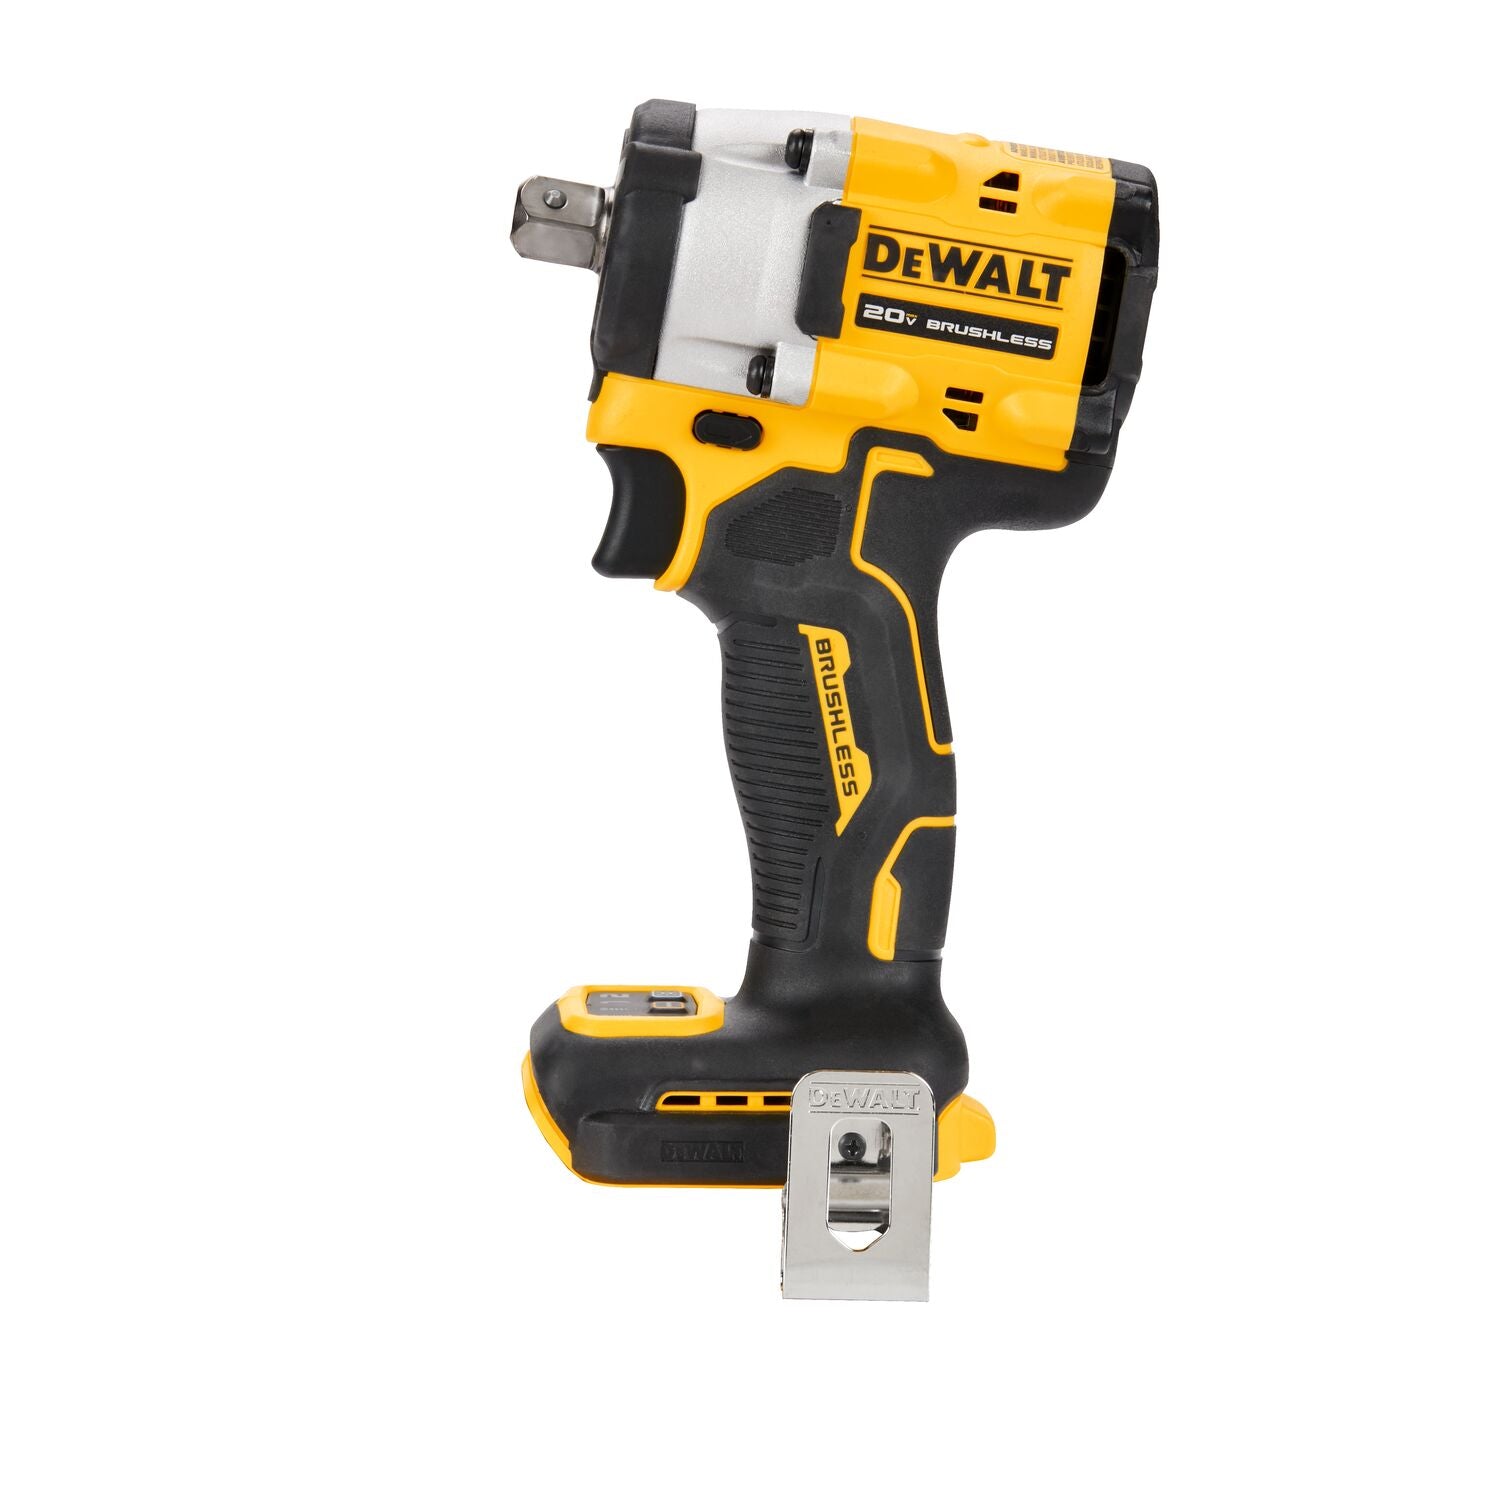 DeWalt DCF922B ATOMIC 20V MAX* 1/2" Cordless Impact Wrench w/ Detent Pin Anvil, Tool Only